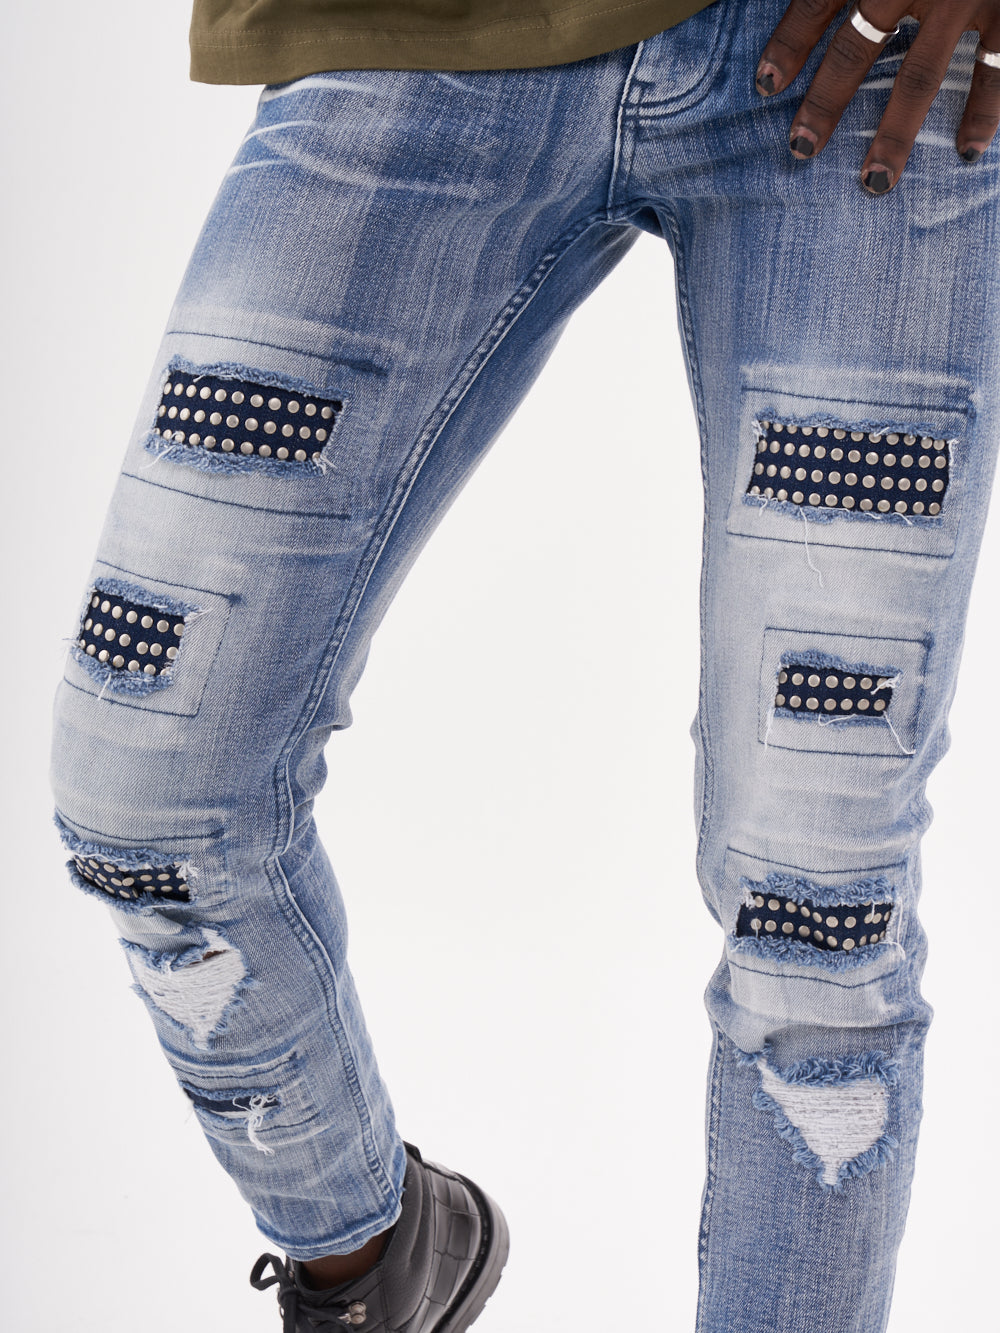 A man wearing a pair of MUTANT jeans with studded patches.